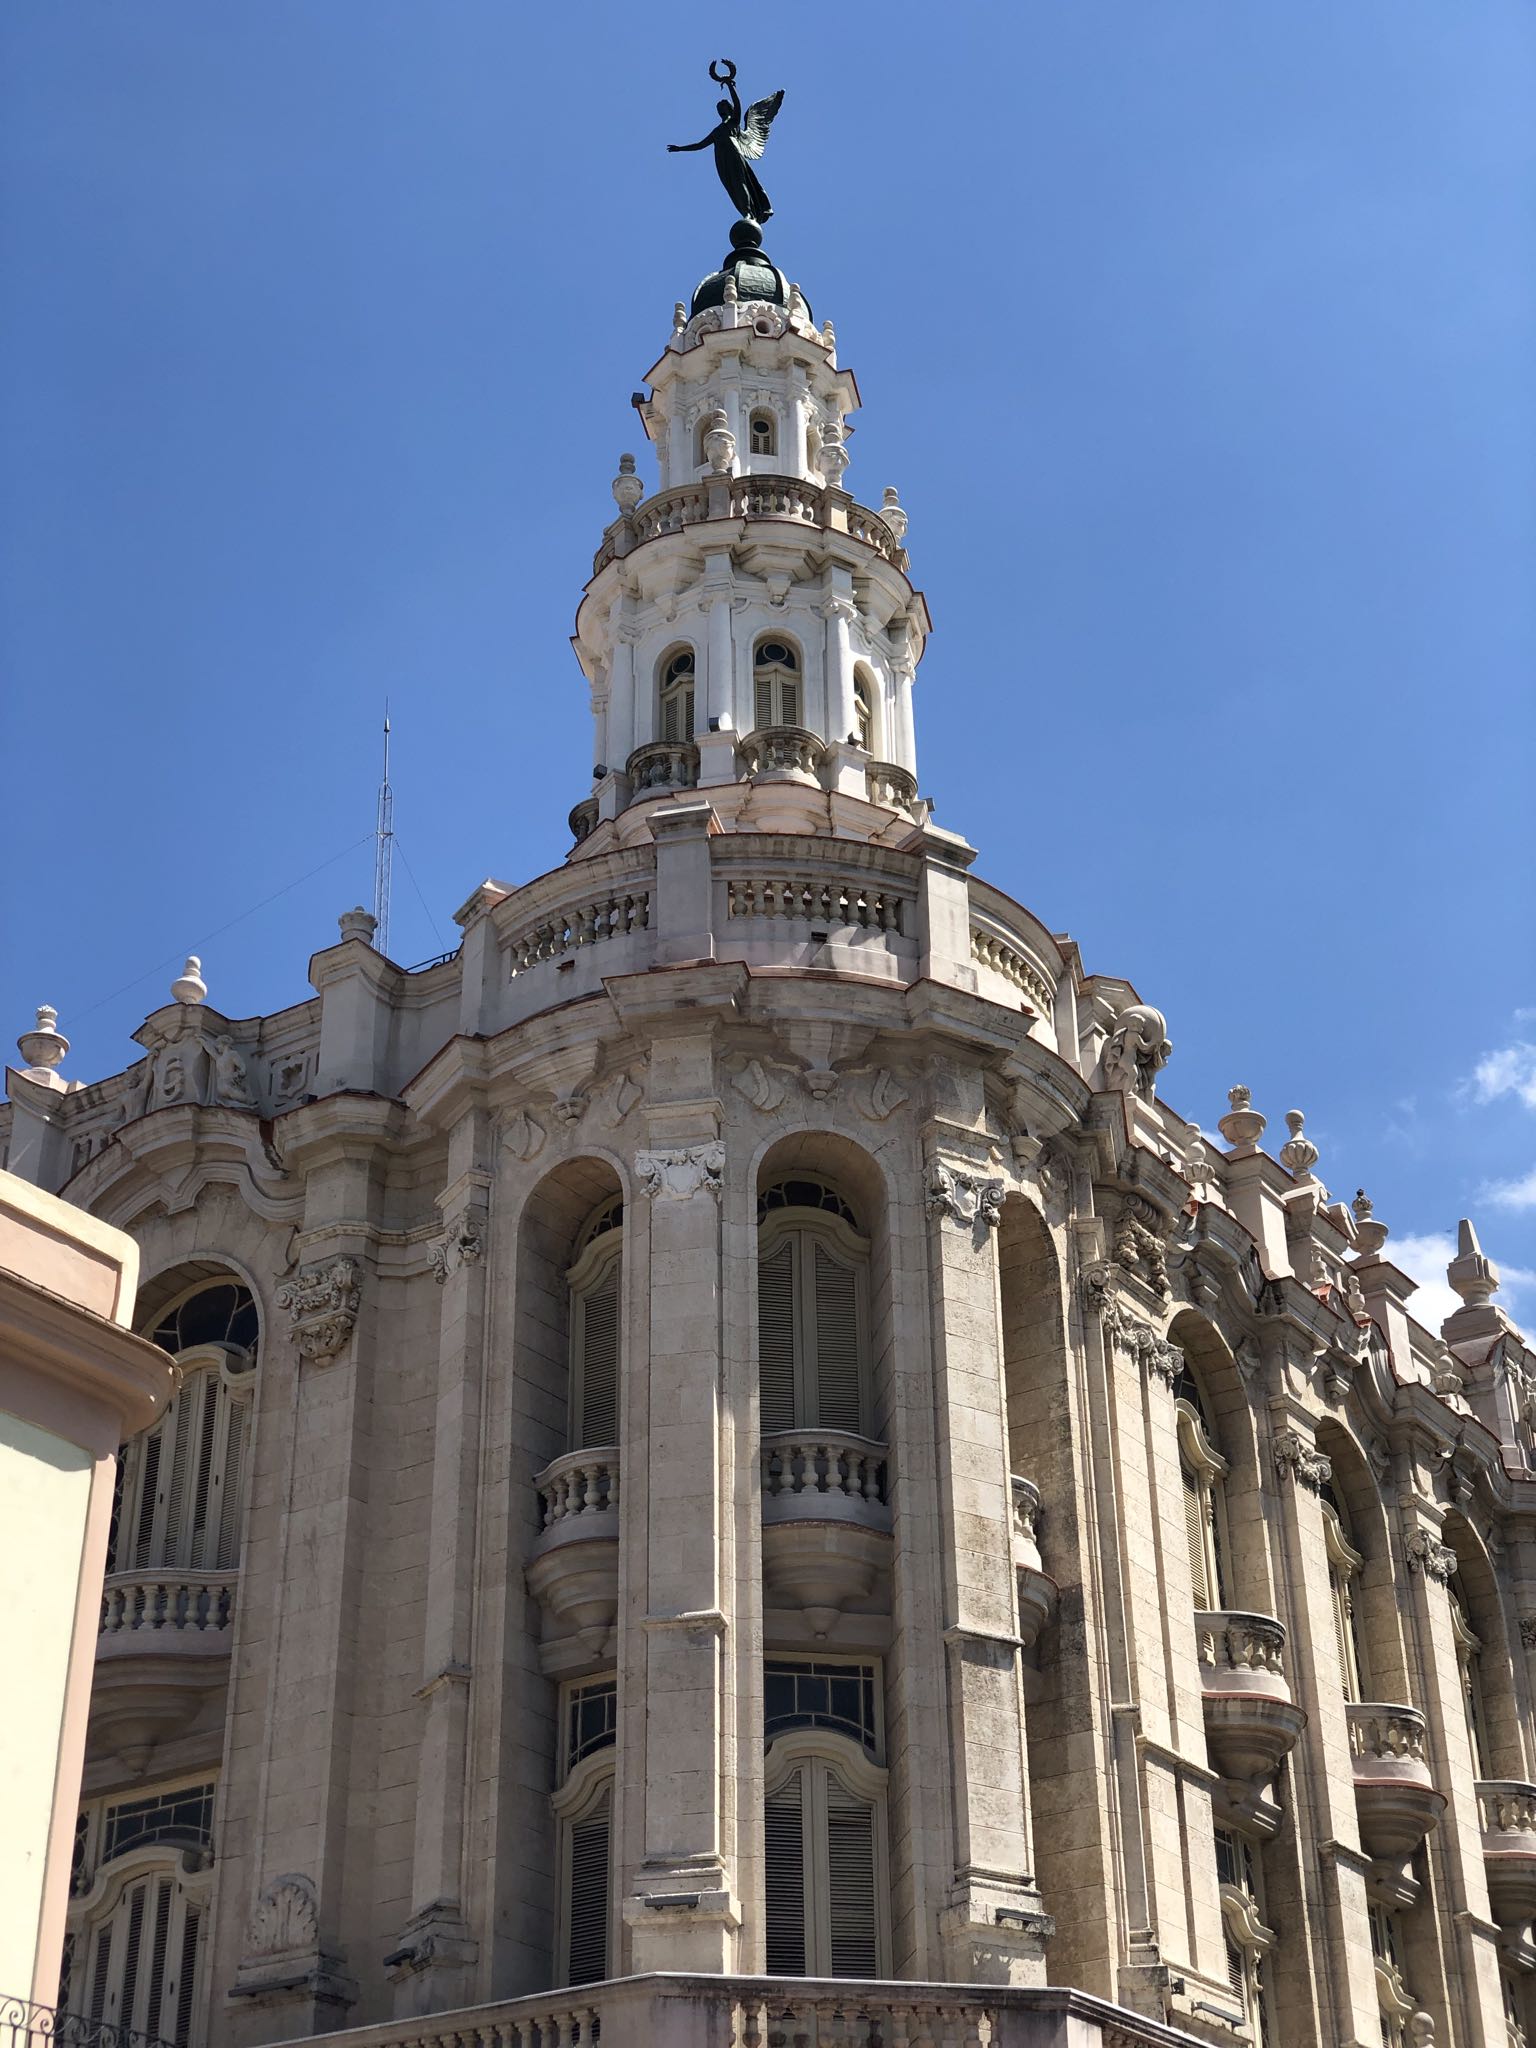 Photo 14 of 221 from the album Highlights Cuba 2019.